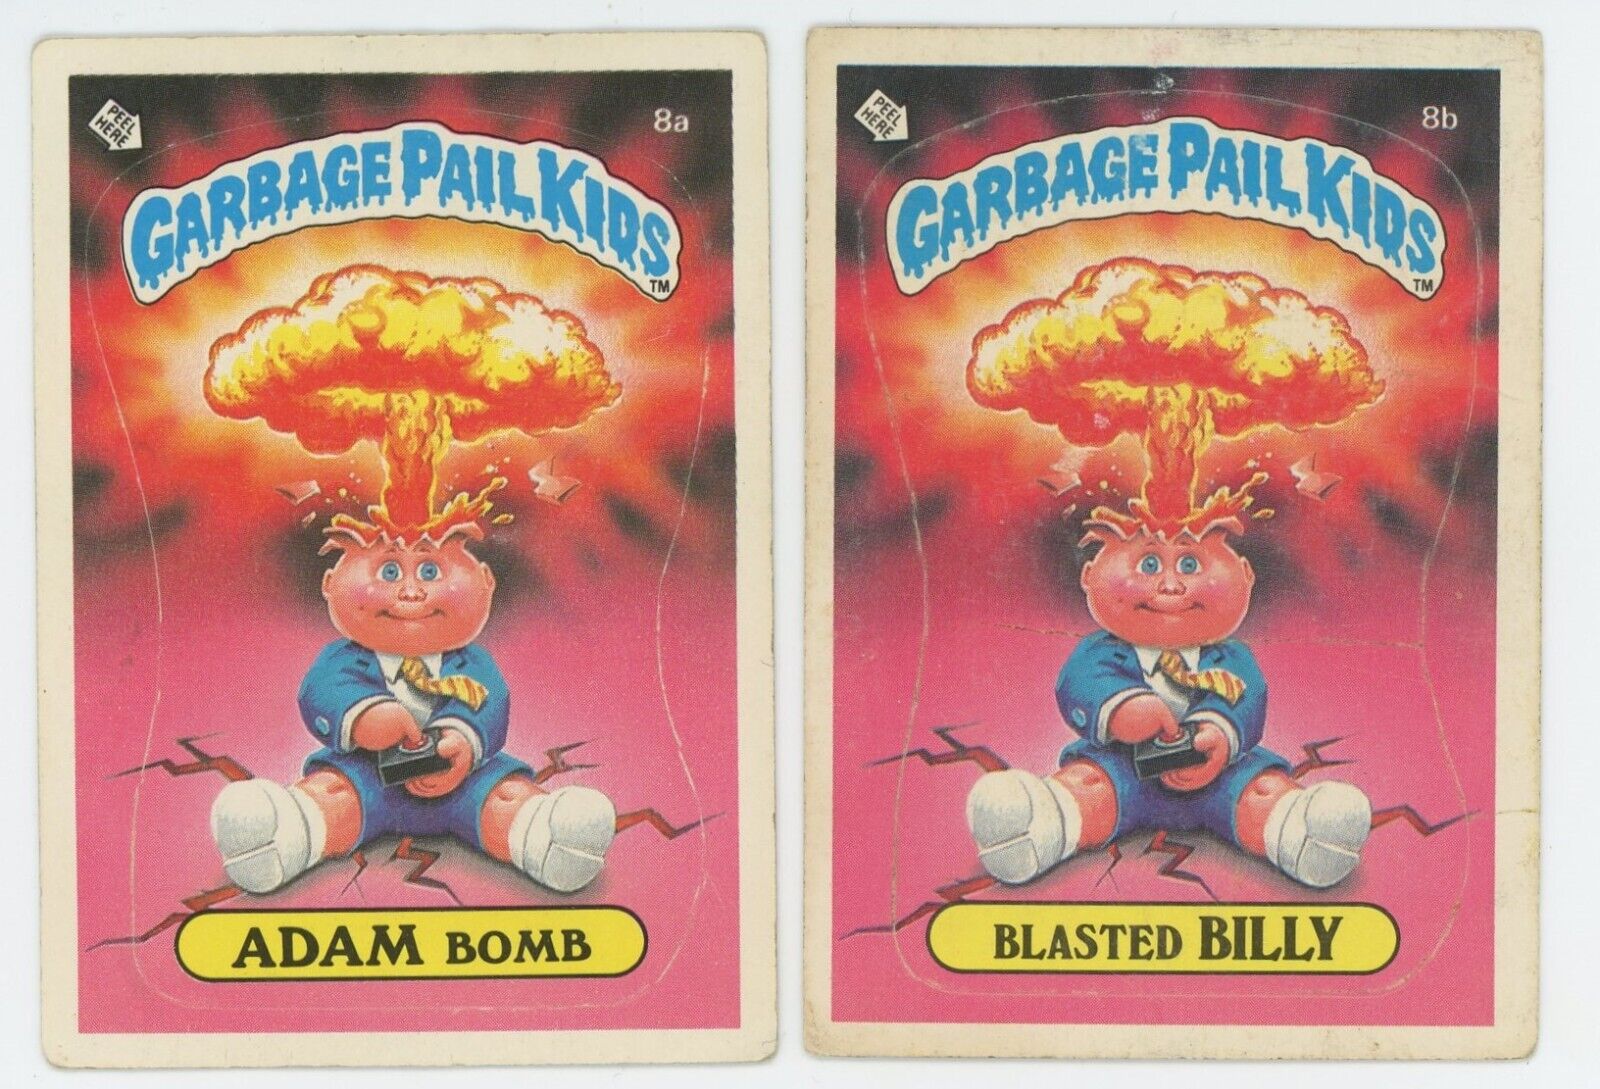 1985 Topps Garbage Pail Kids OS1 1st Series ADAM BOMB 8a & BLASTED BILLY 8b Card